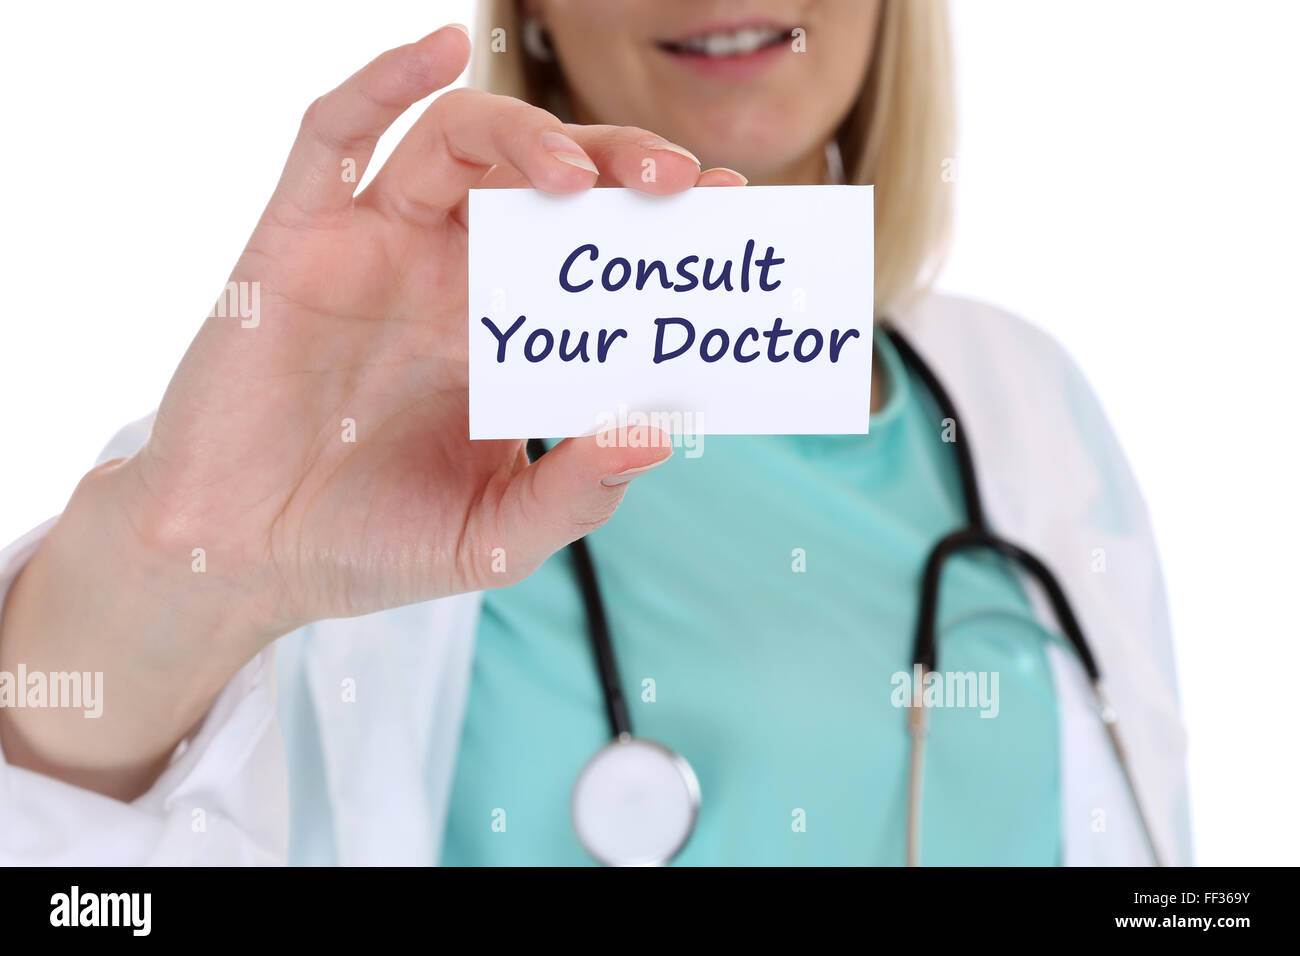 Ask consult your doctor nurse ill illness healthy health check-up screening with sign Stock Photo